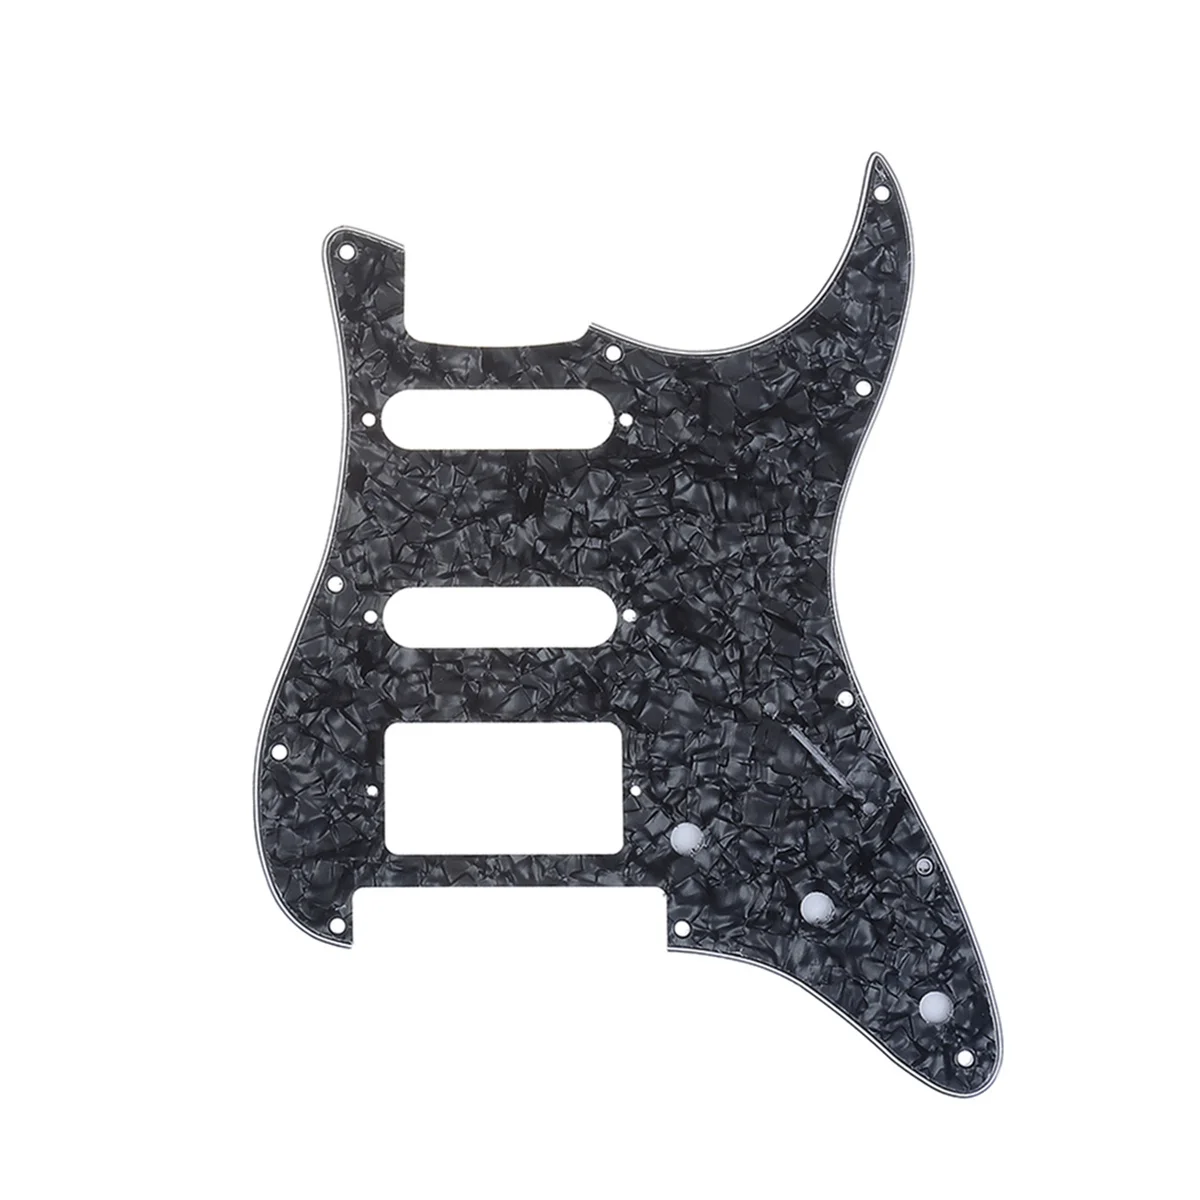 

Musiclily Pro 11-Hole Strat HSS Guitar Pickguard for American/Mexican Fender Stratocaster Floyd Rose Bridge Cut,4Ply Black Pearl